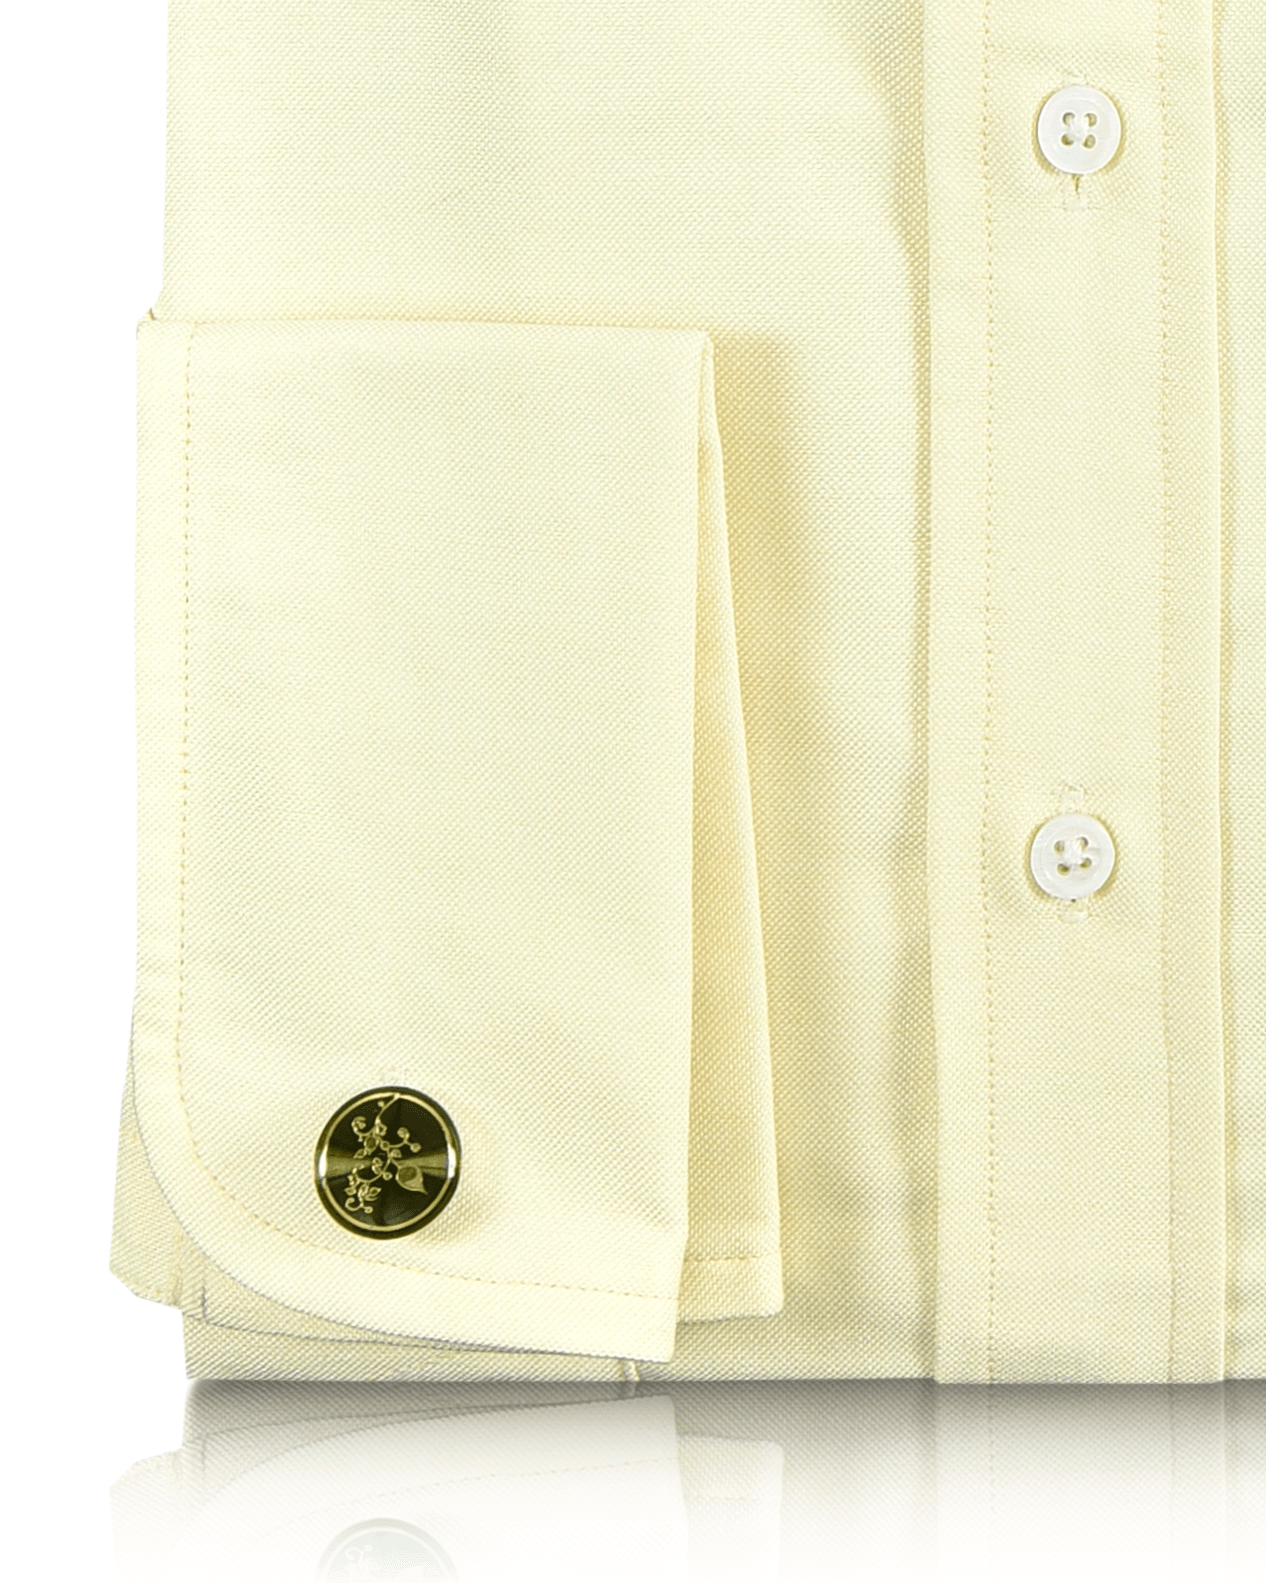 Cuff of the custom oxford shirt for men by Luxire in light yellow